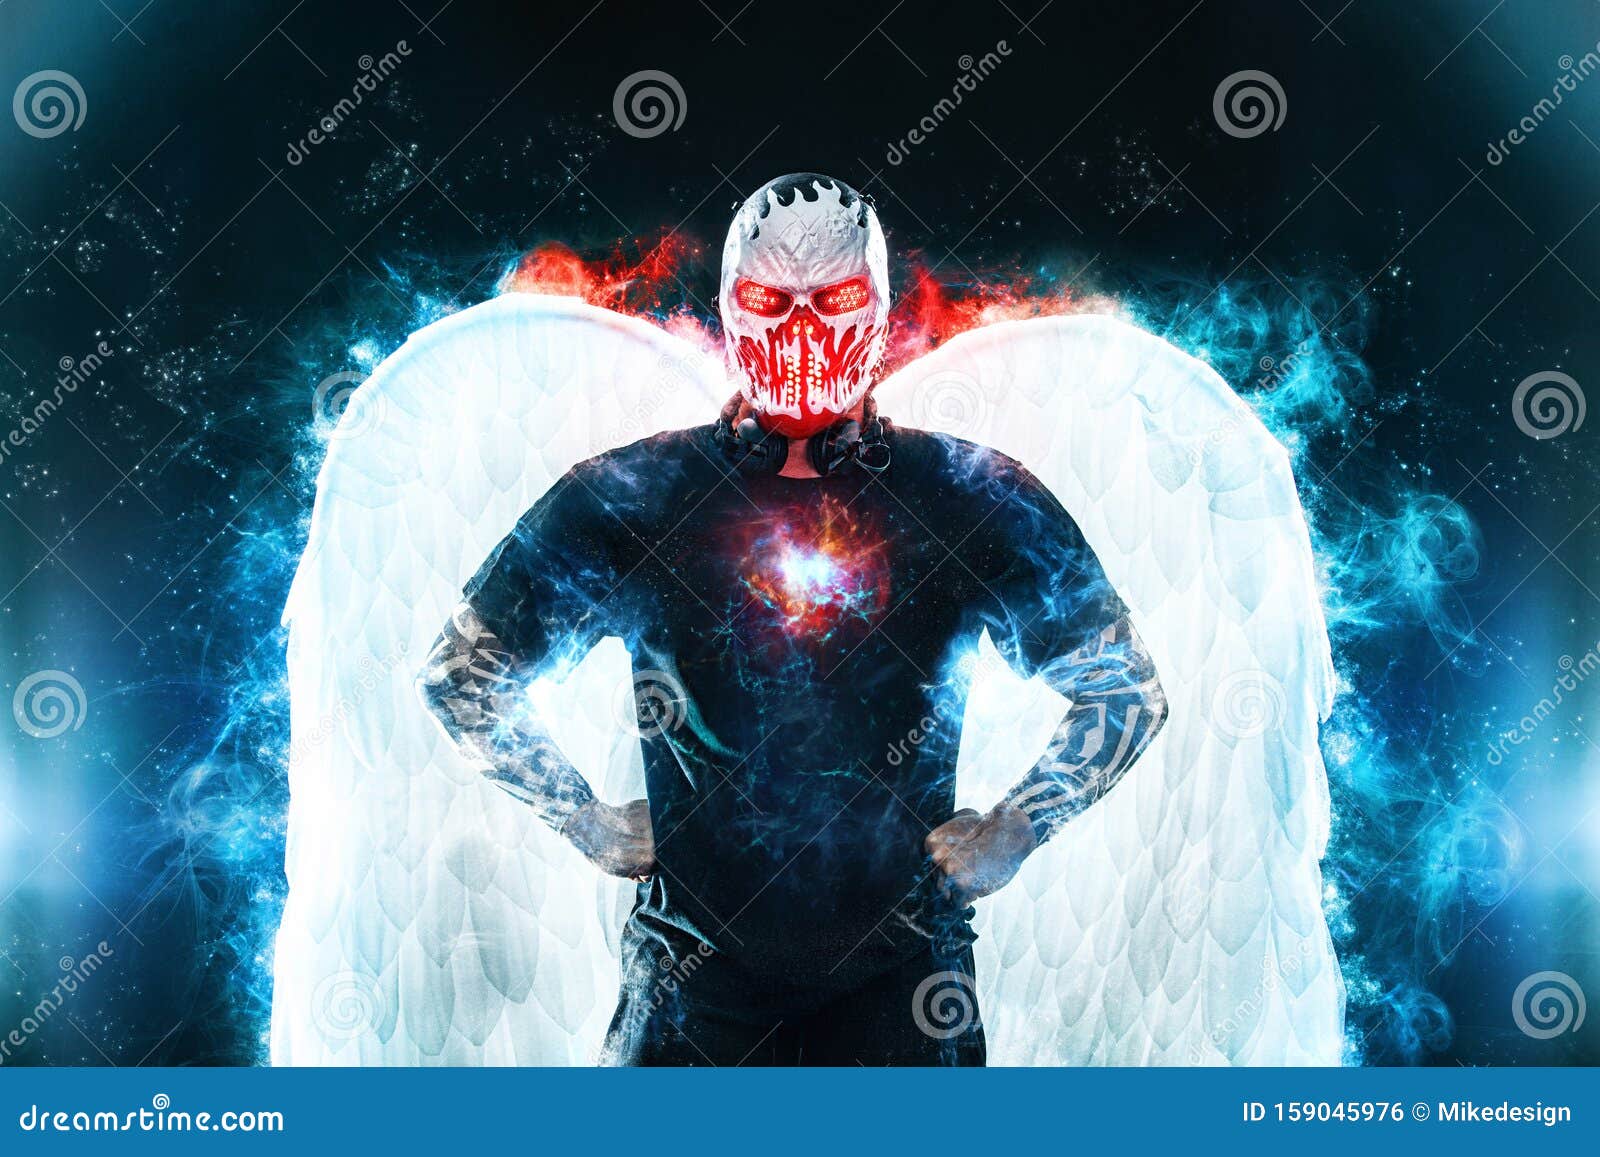 Mysterious Man In Black Wear And Skull Mask With White Wings. Fantasy Book  Or Computer Game Cover Concept On Halloween Stock Photo - Image of hood,  mask: 159045976